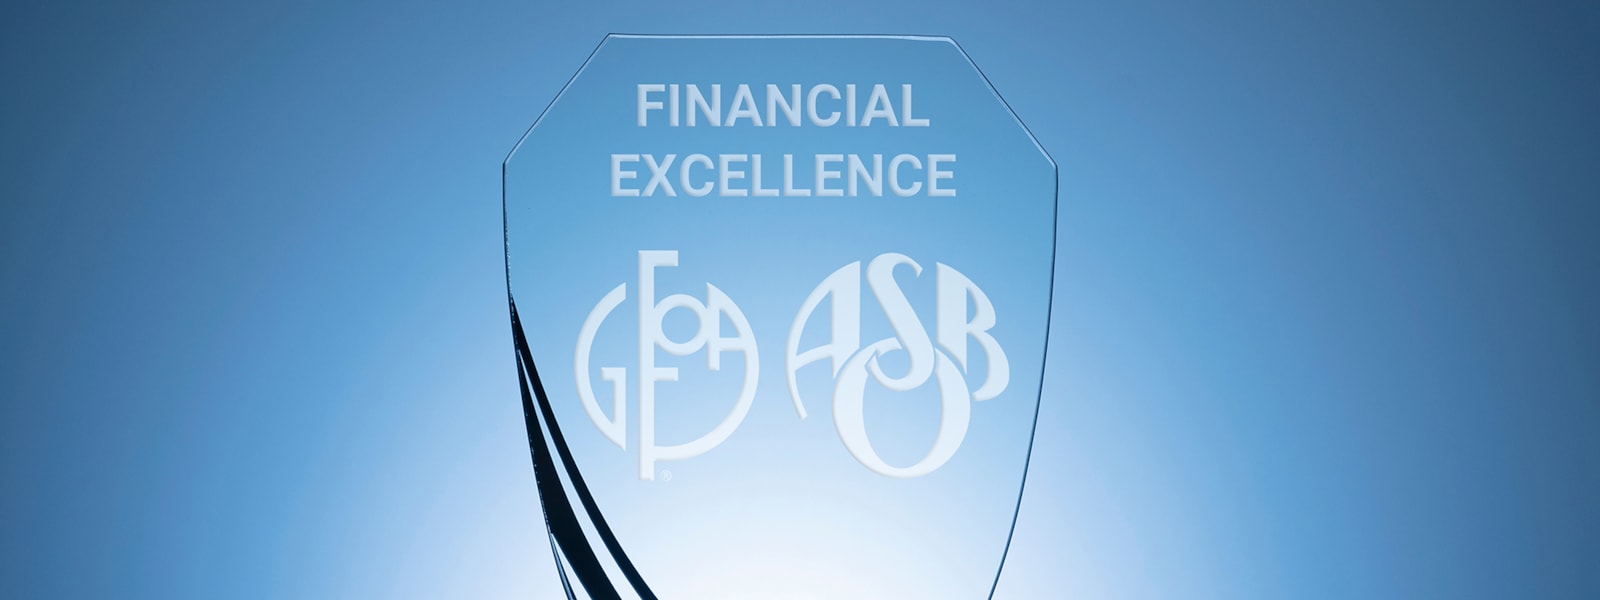 Awards for financial excellence